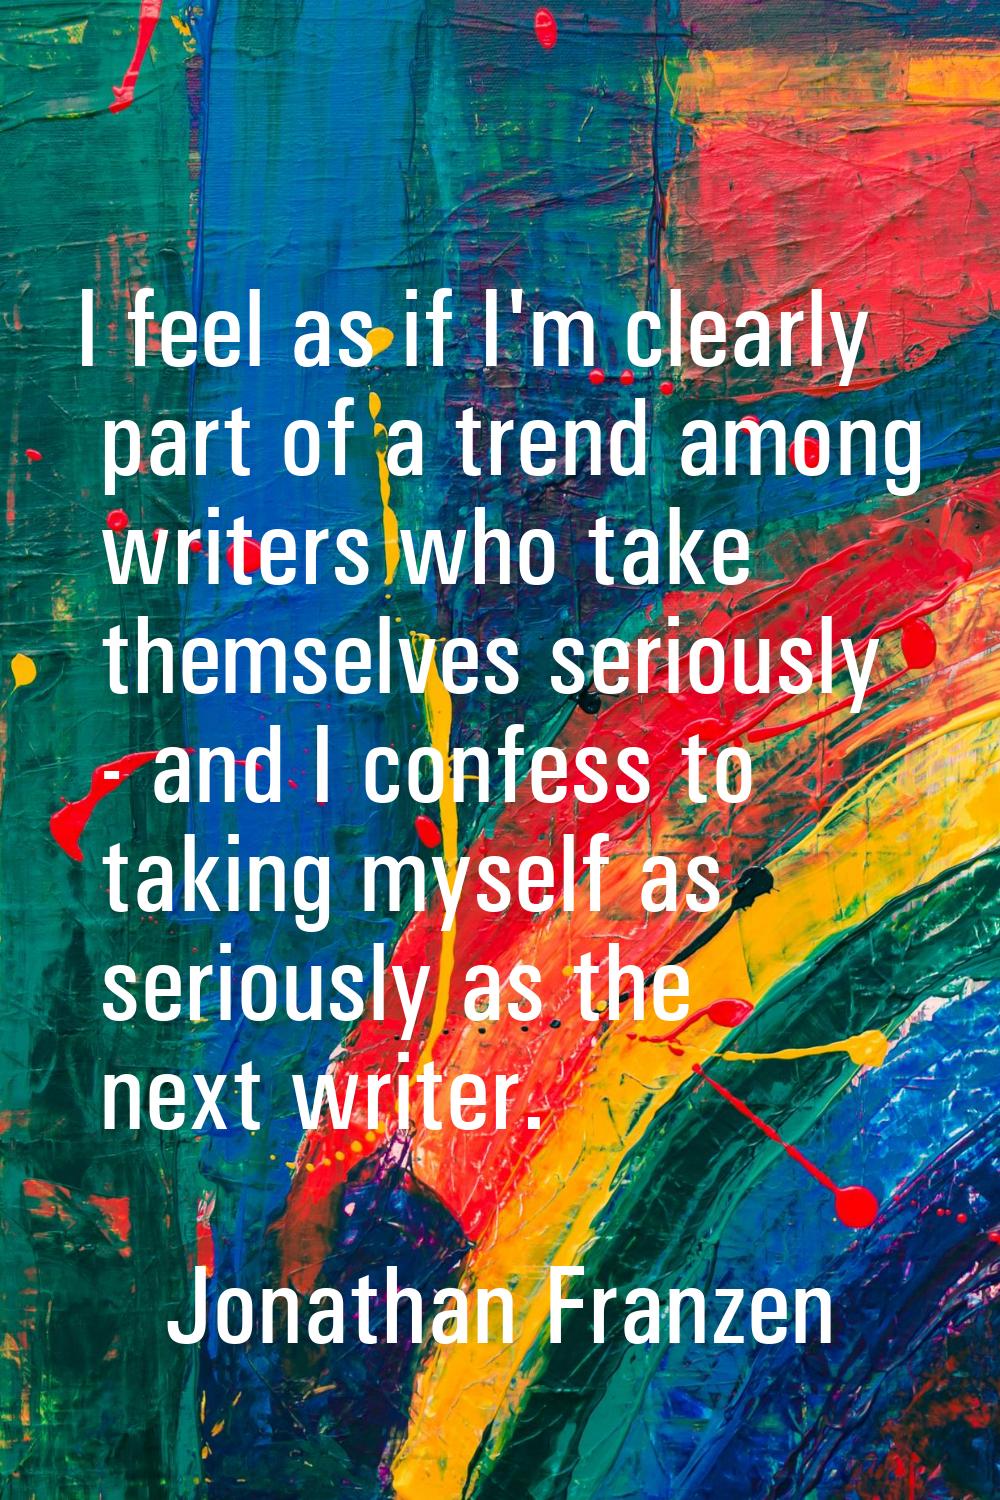 I feel as if I'm clearly part of a trend among writers who take themselves seriously - and I confes